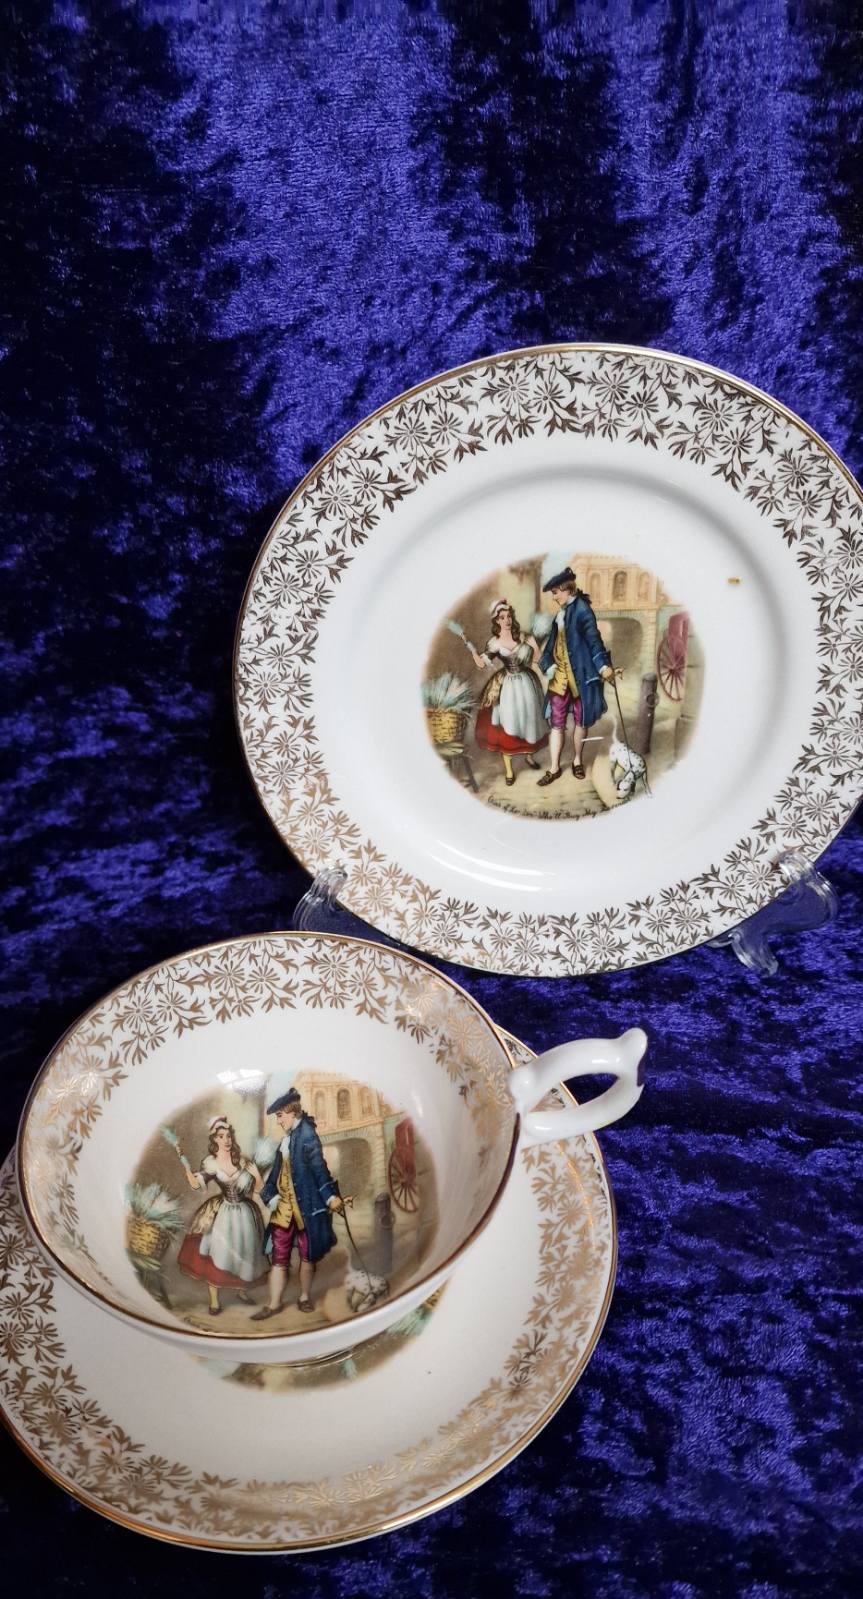 Fine Black Cherries Pattern china cups,saucers and side plate with man and woman illustration in Tea Trio set.